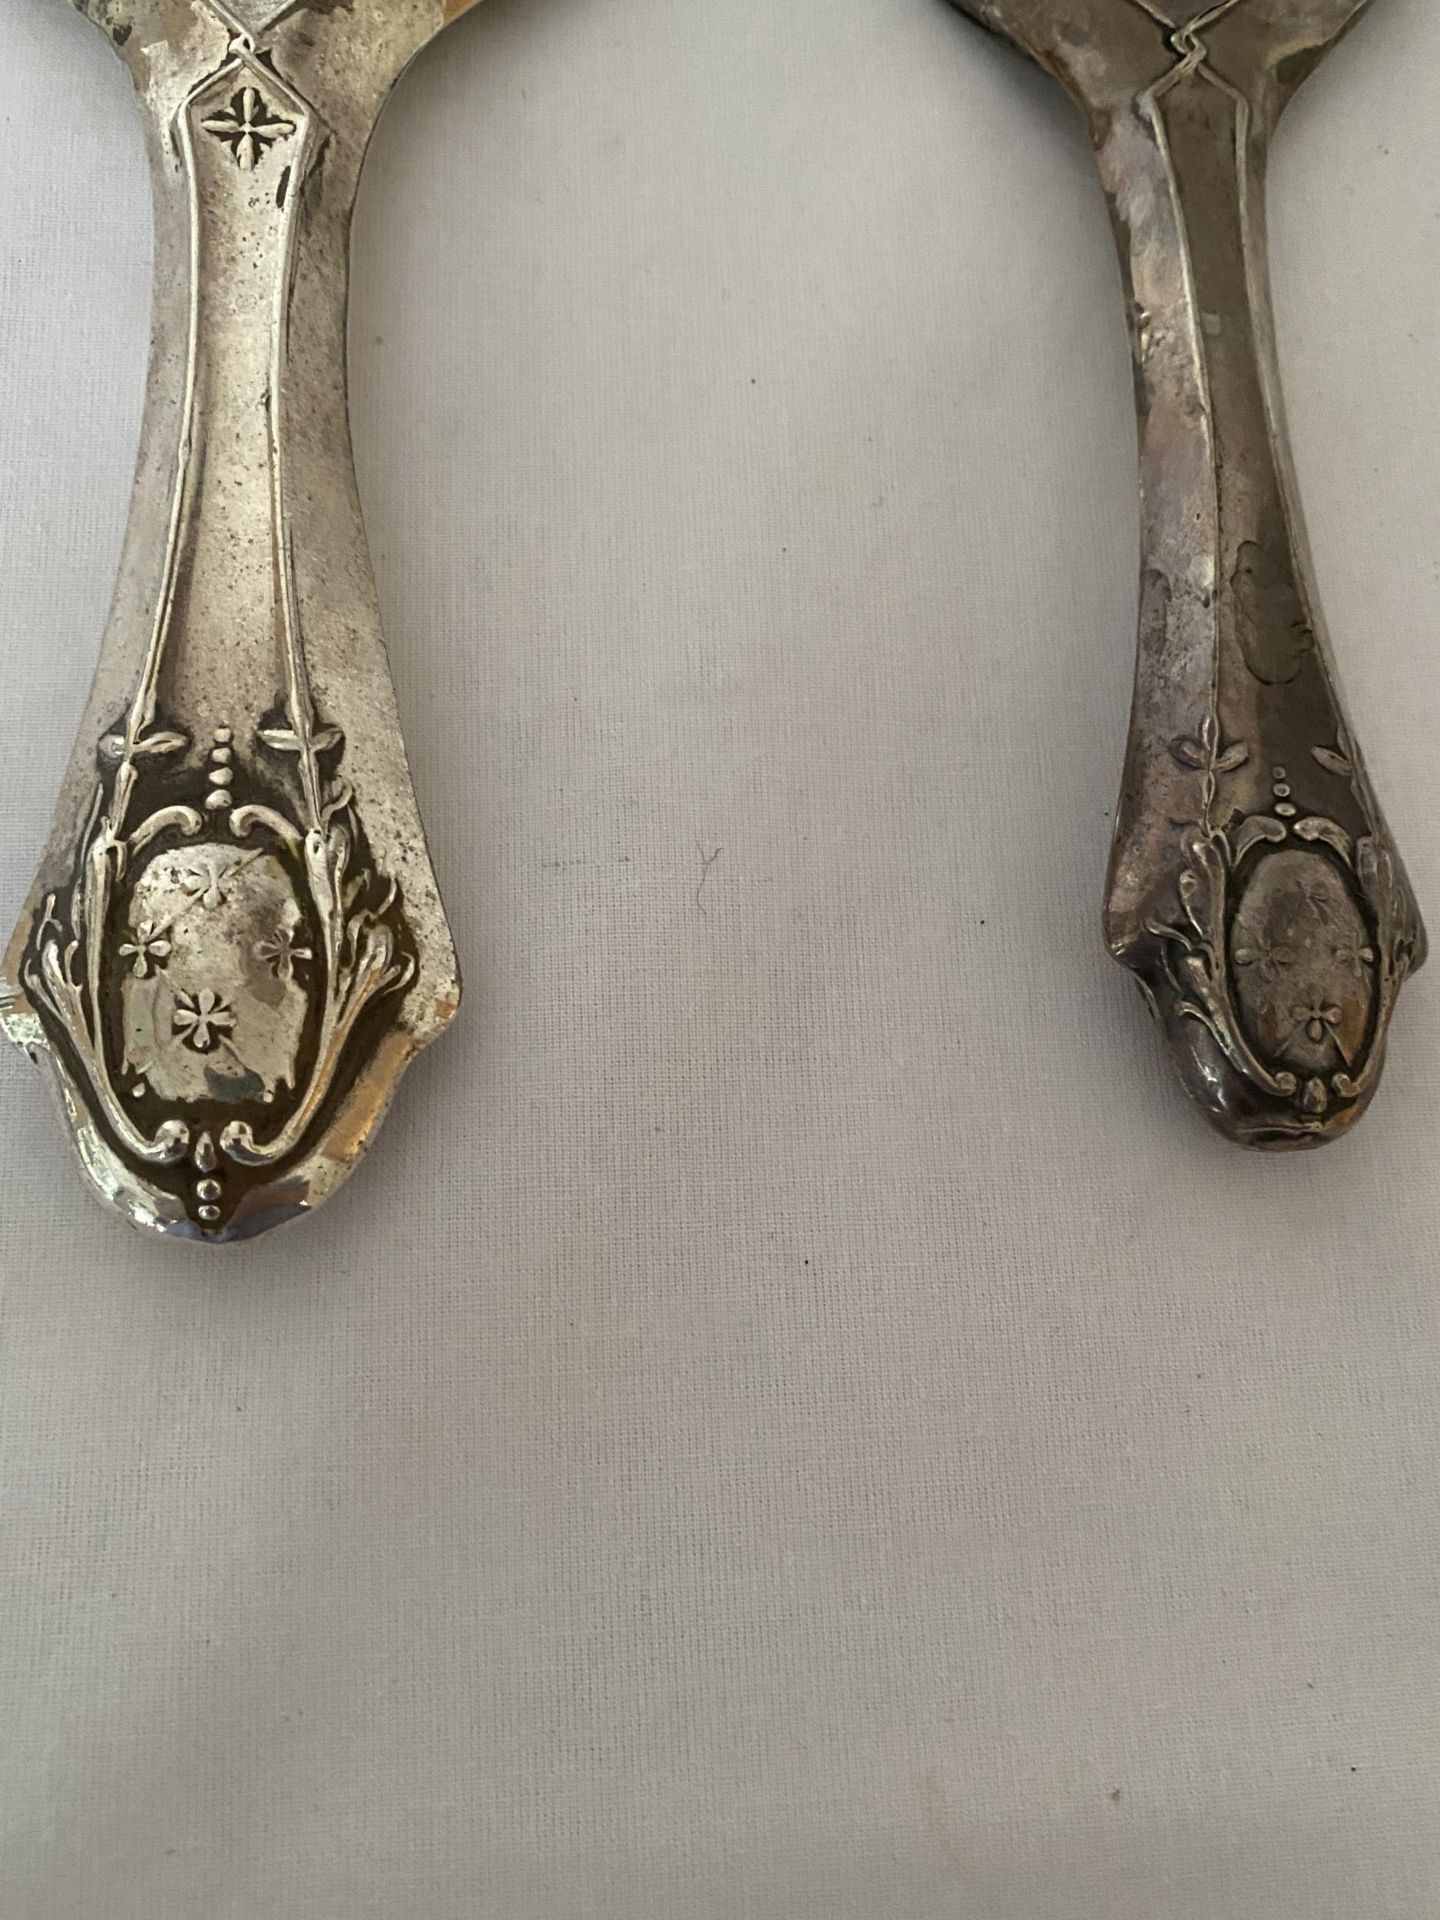 TWO HALLMARKED BIRMINGHAM SILVER BACKED HAND MIRRORS, EARLIEST DATING TO 1913 - Image 7 of 18